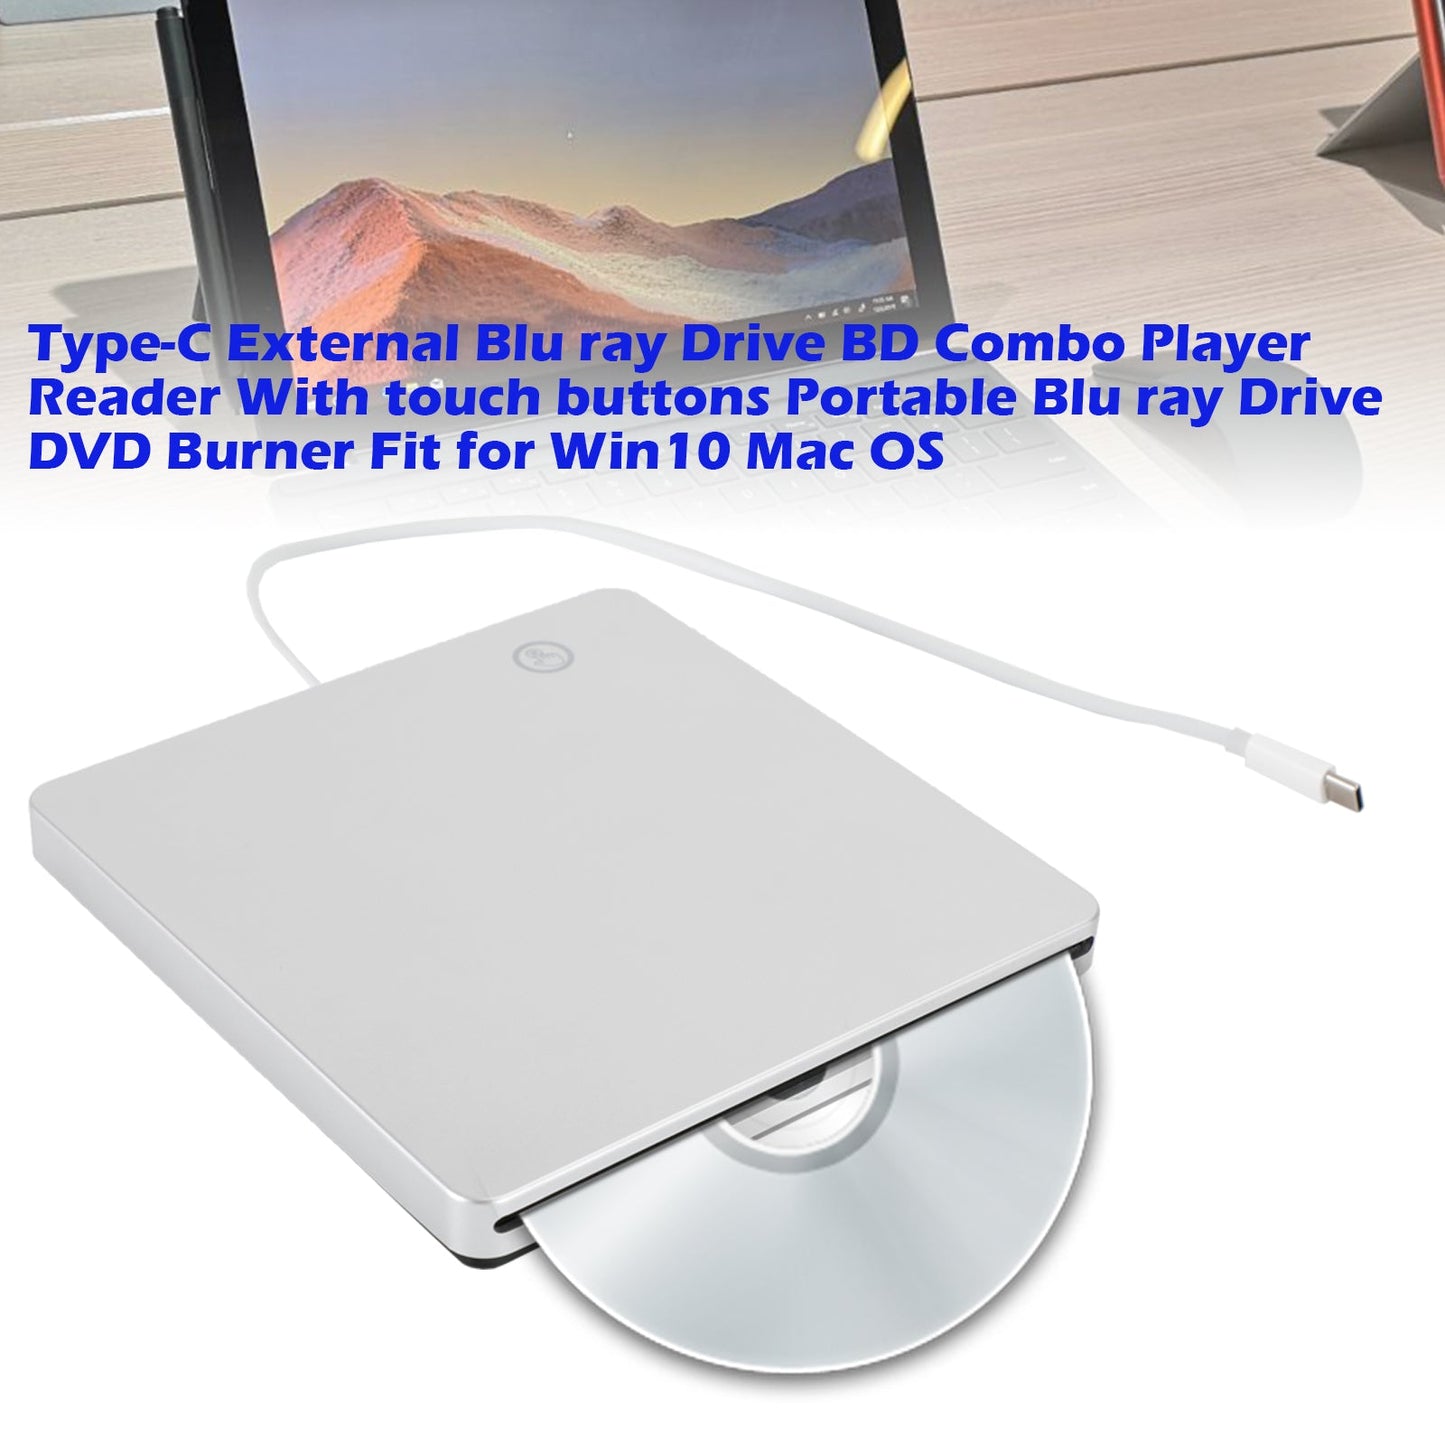 Type-C External Blu ray Drive BD DVD Combo Player Reader With Touch Buttons